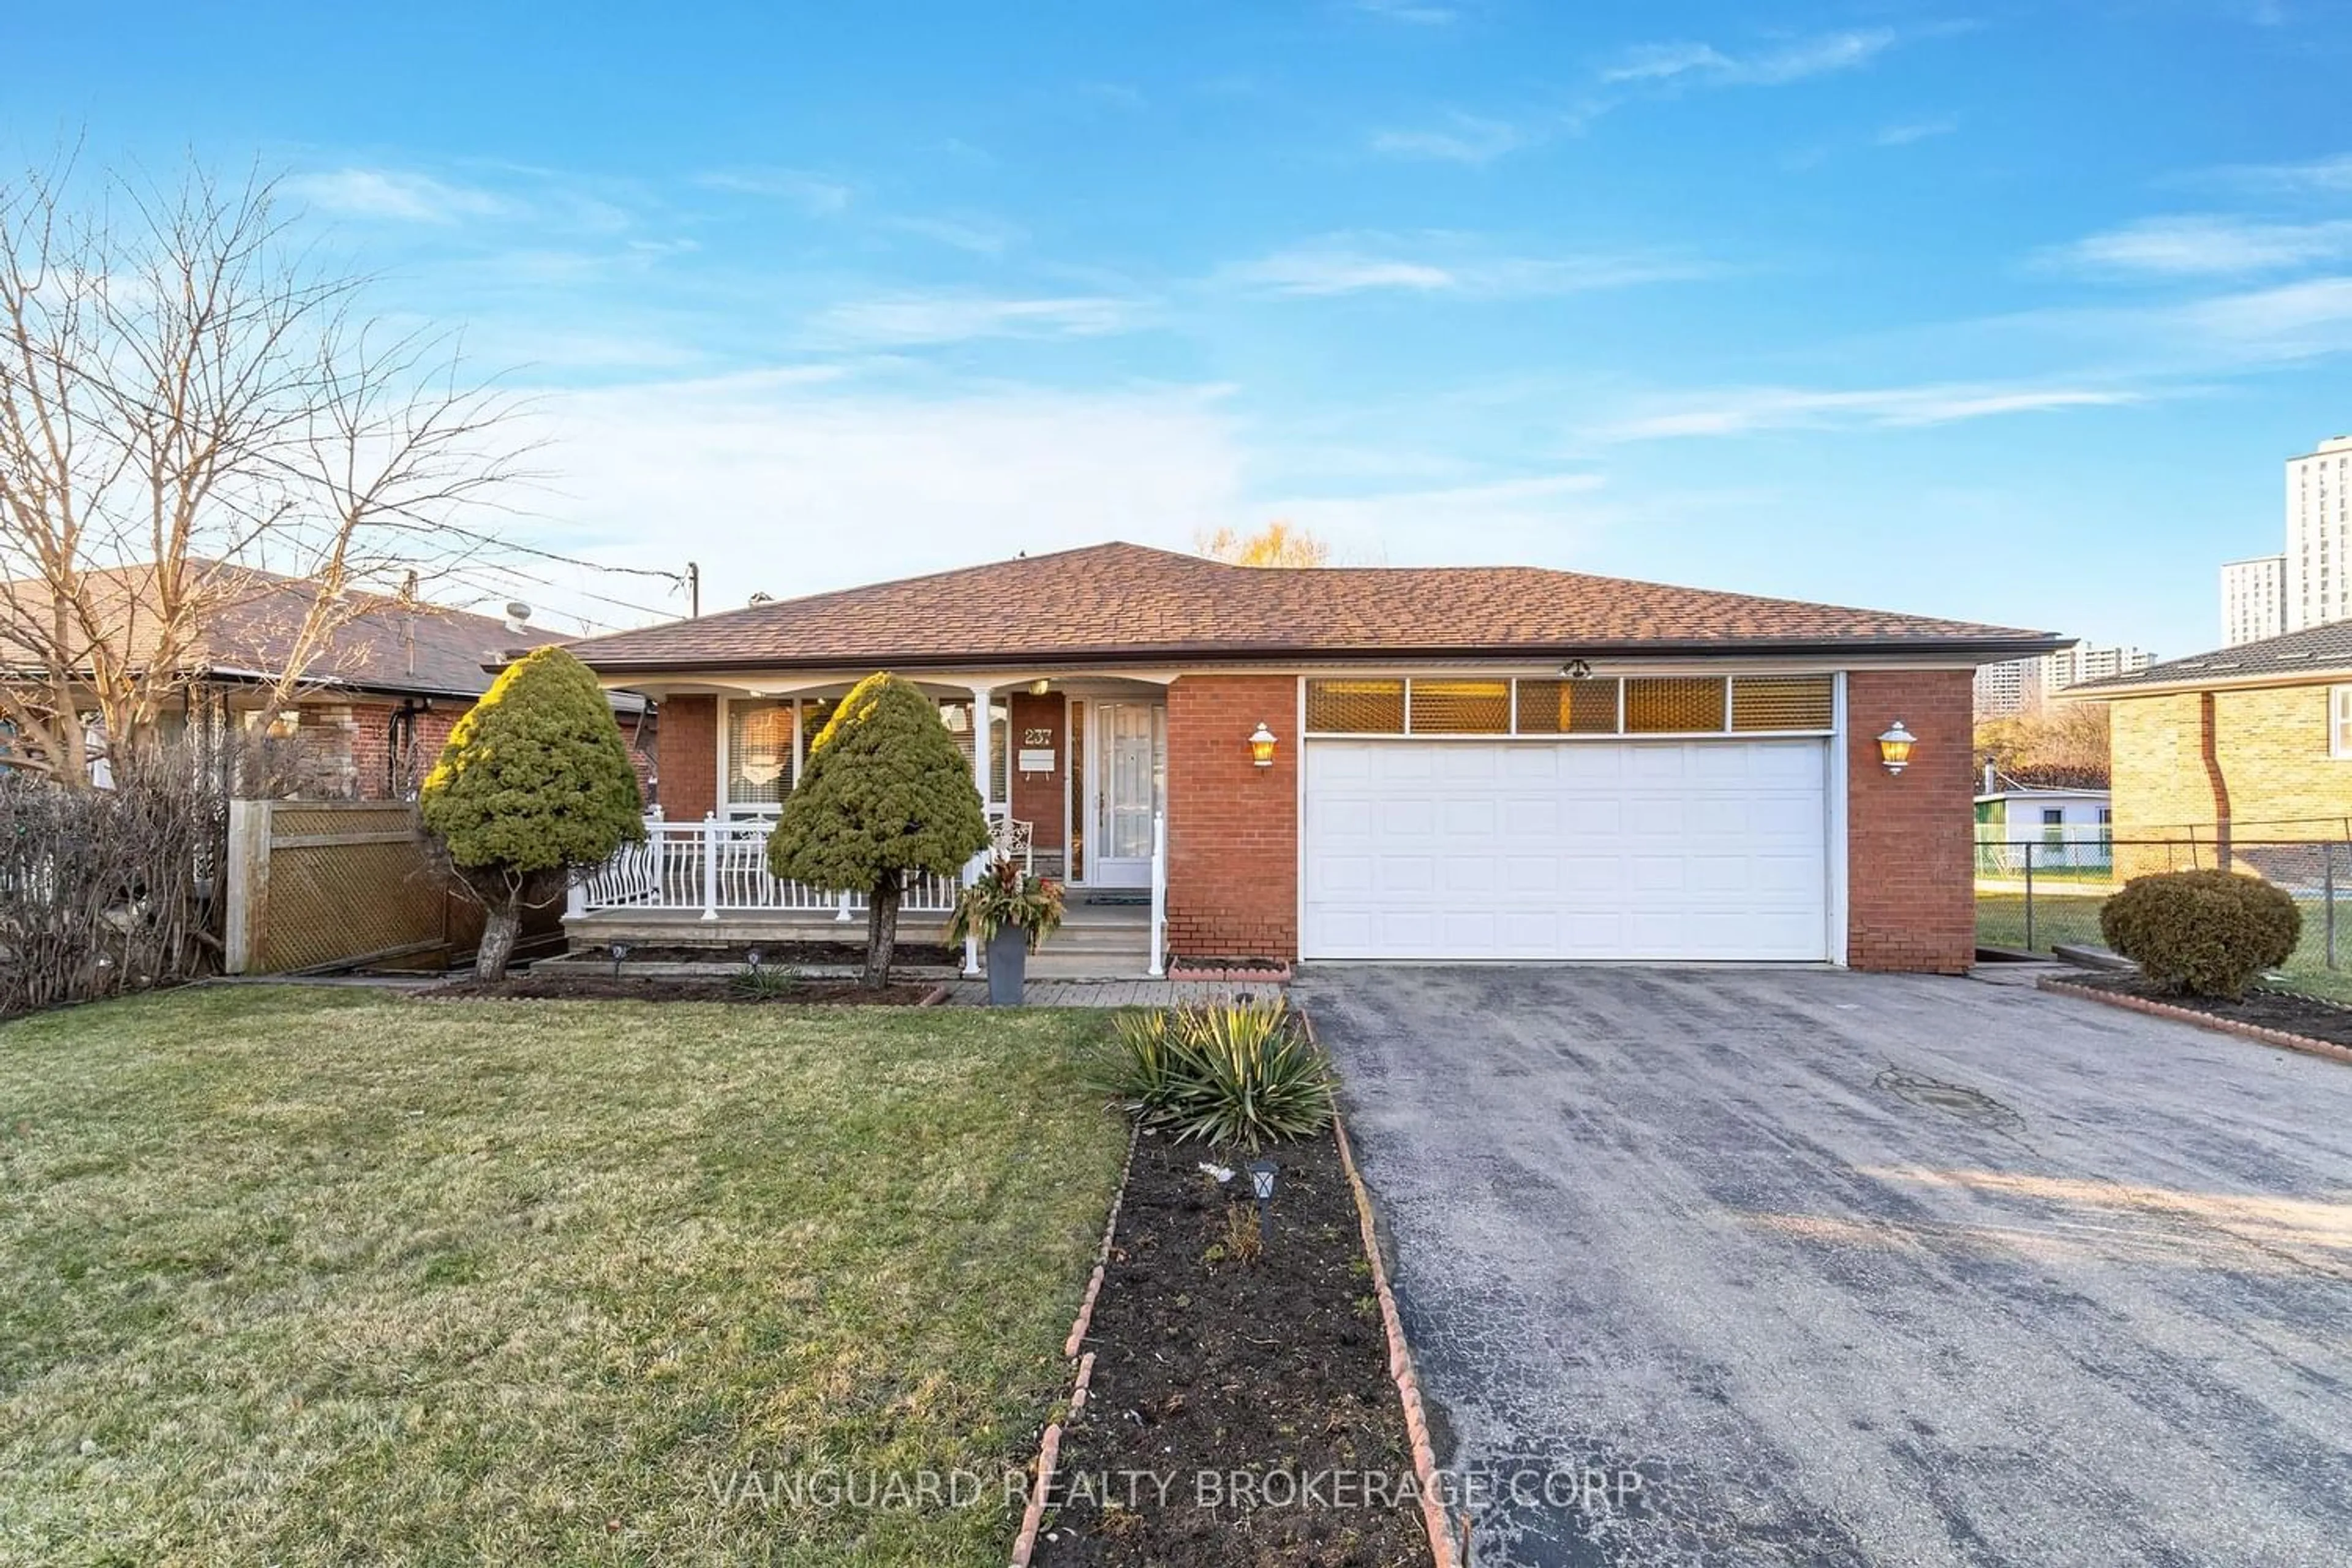 Home with brick exterior material for 237 Derrydown Rd, Toronto Ontario M3J 1S2